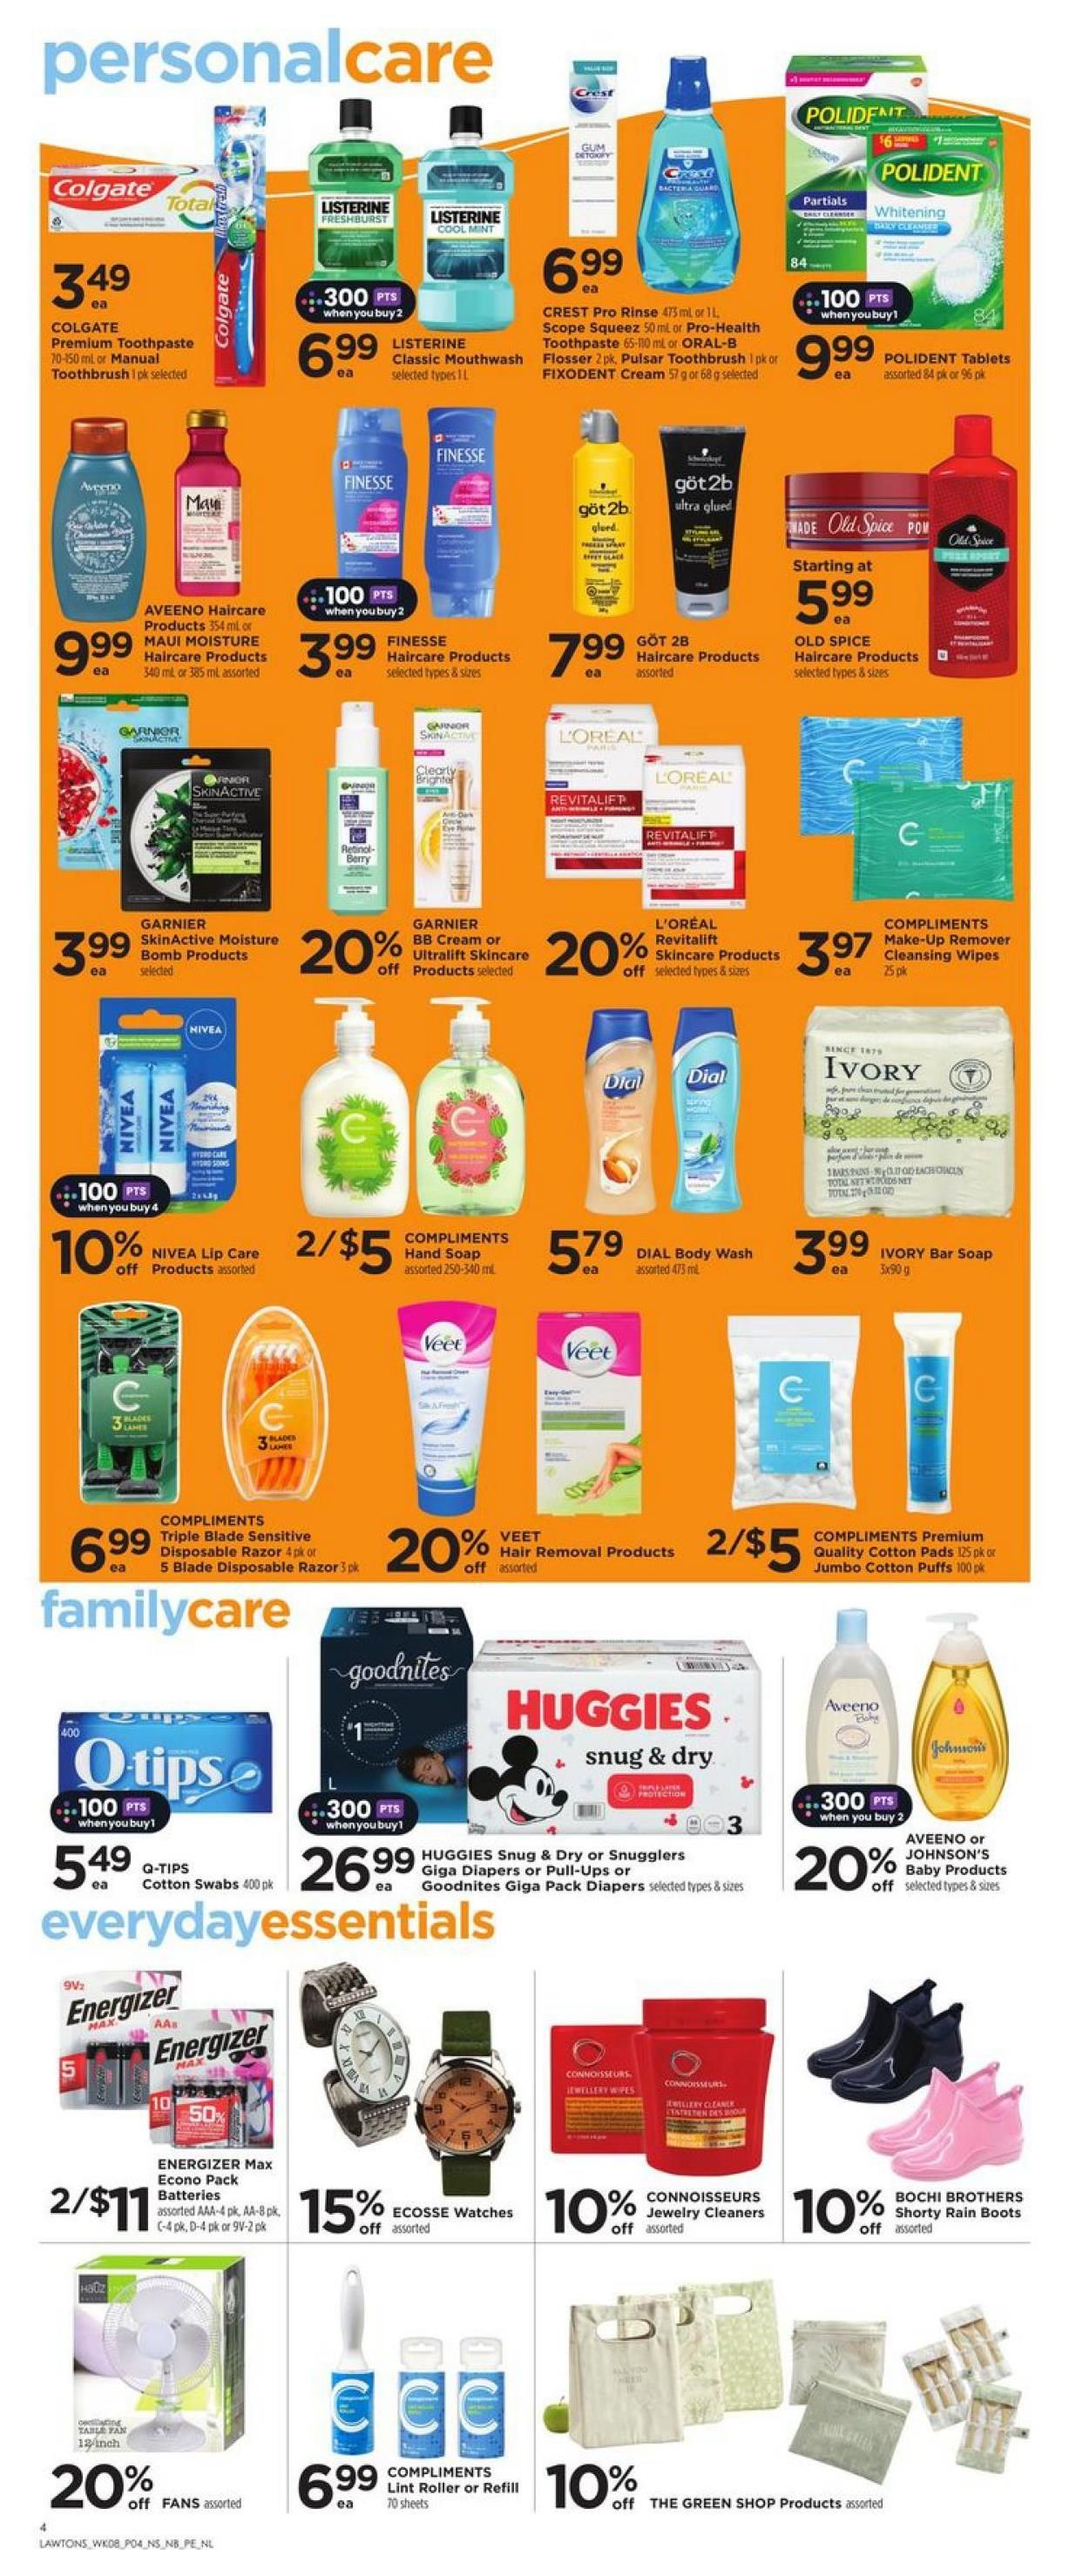 Lawtons Drugs - Weekly Flyer Specials - Page 4